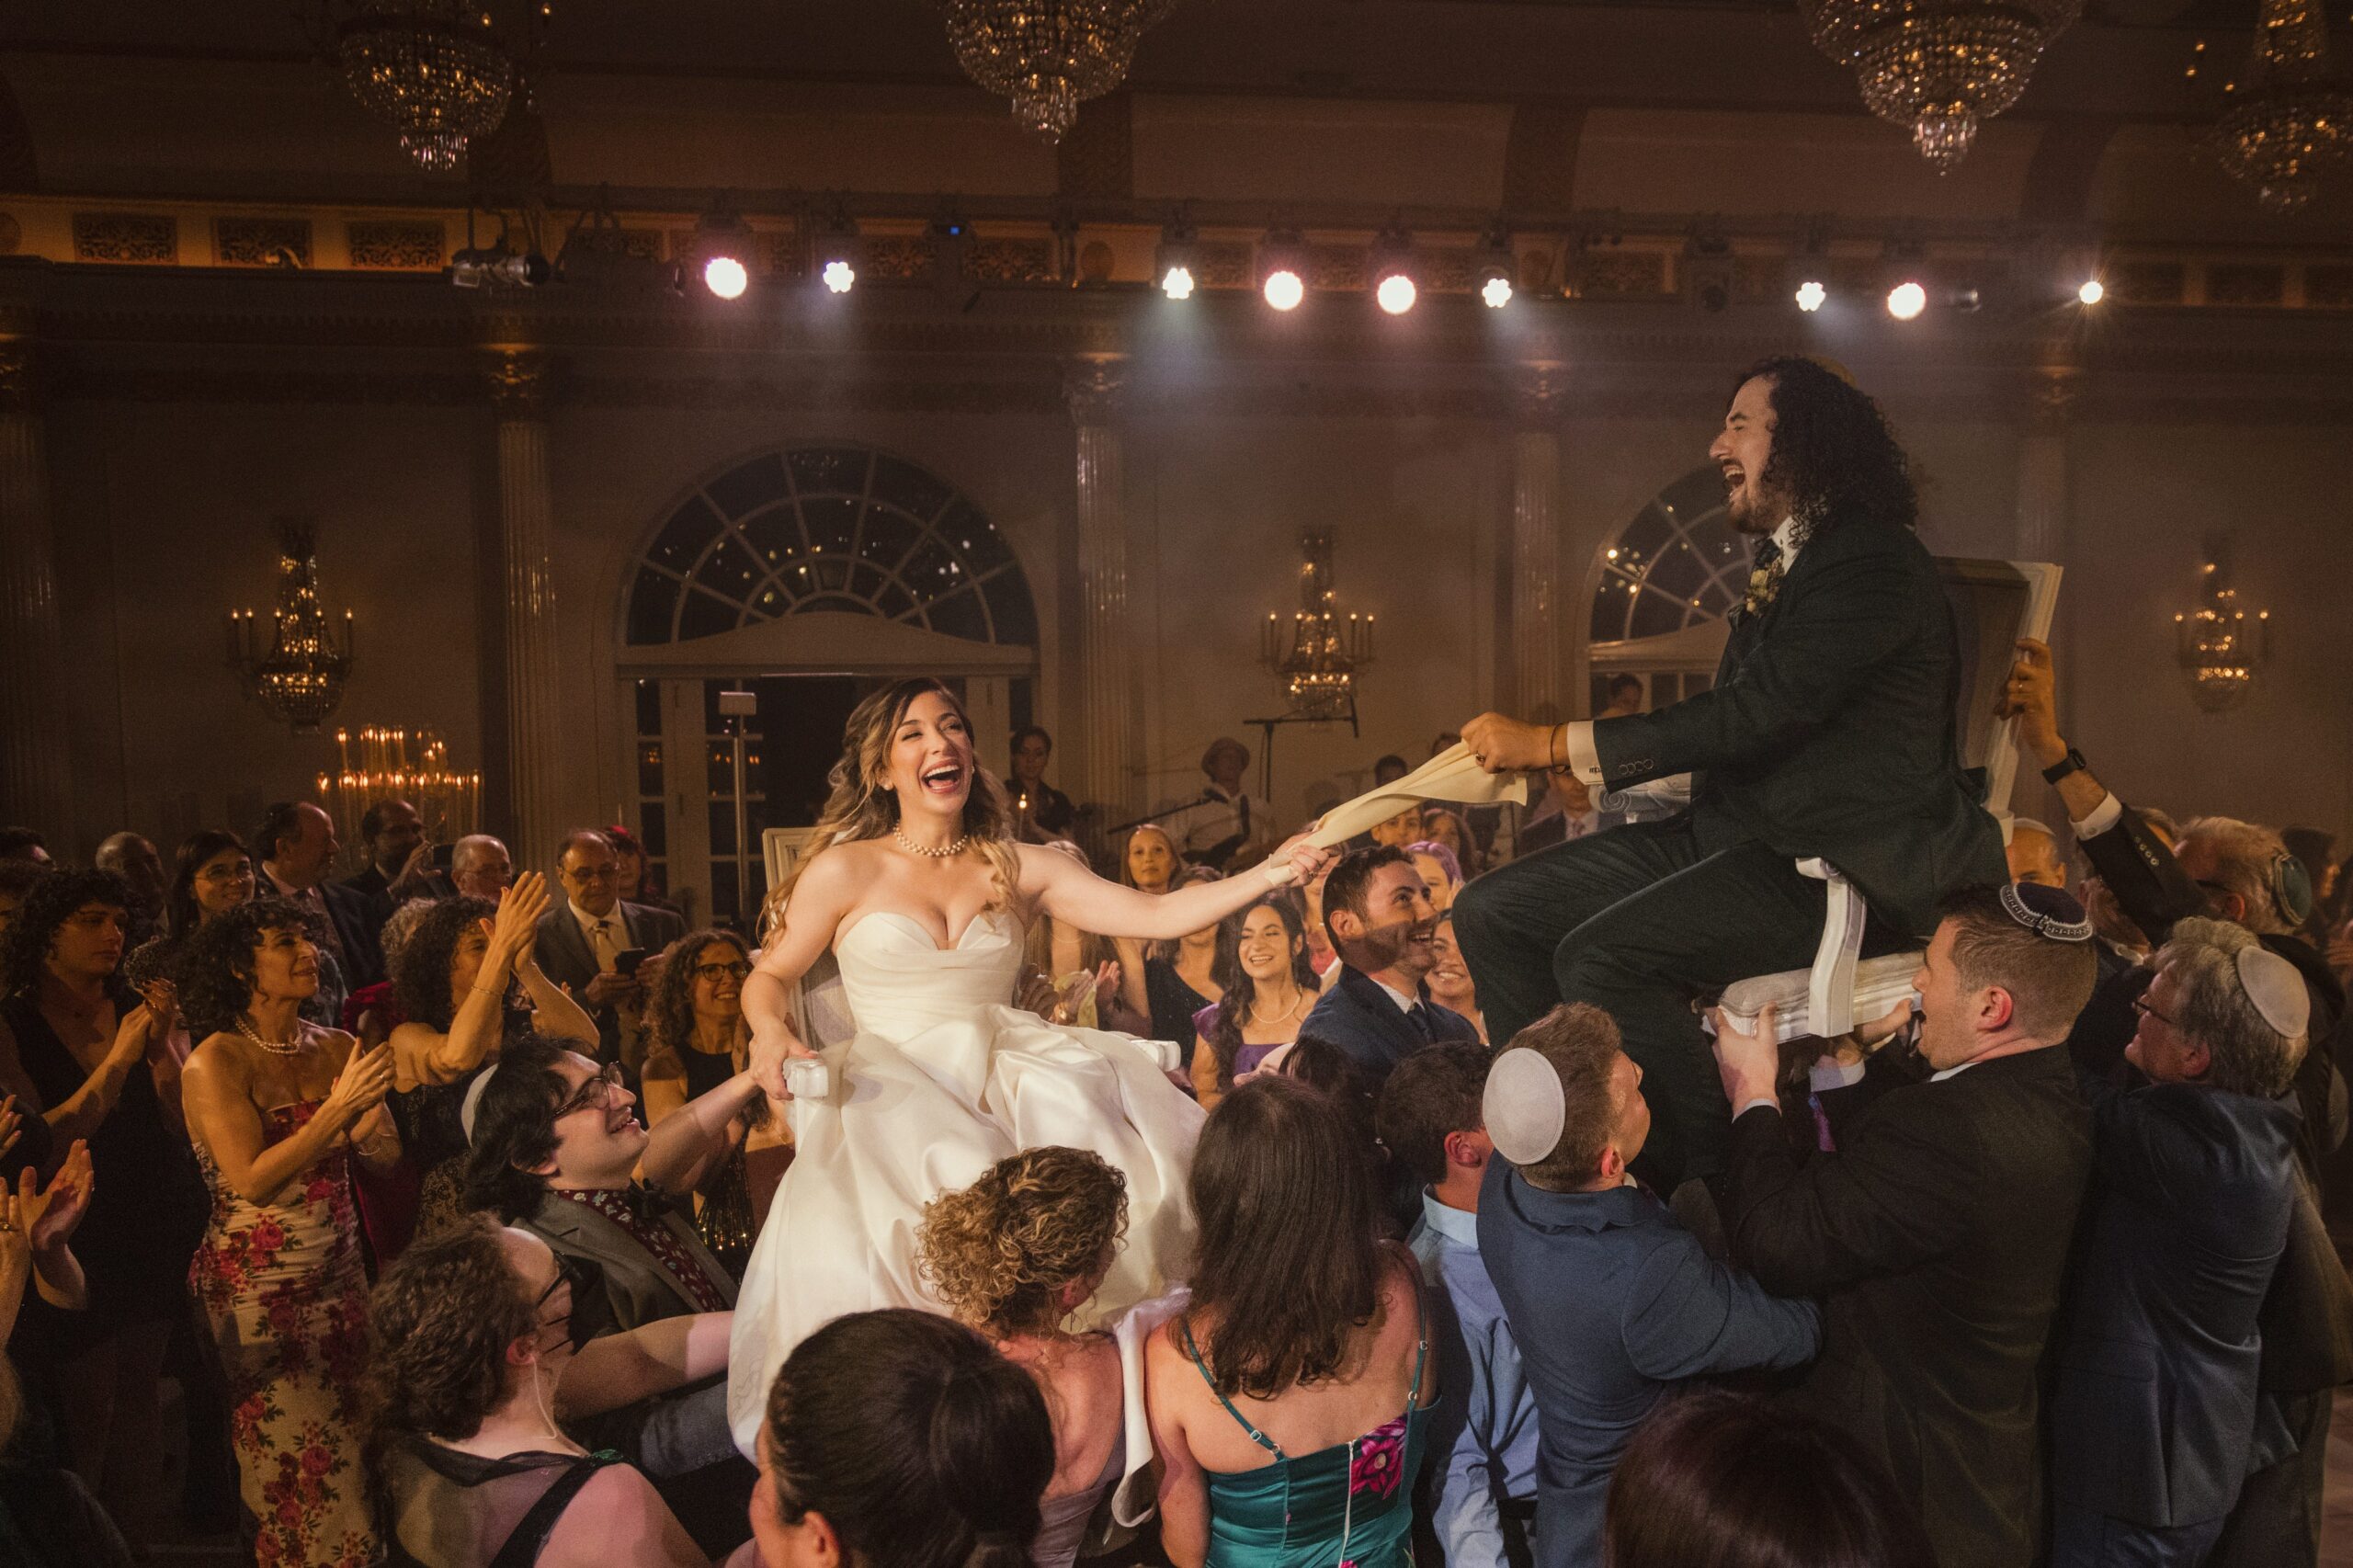 A bride and groom are lifted on chairs during a luxurious summer wedding celebration in NJ, surrounded by cheering guests in a grand ballroom.